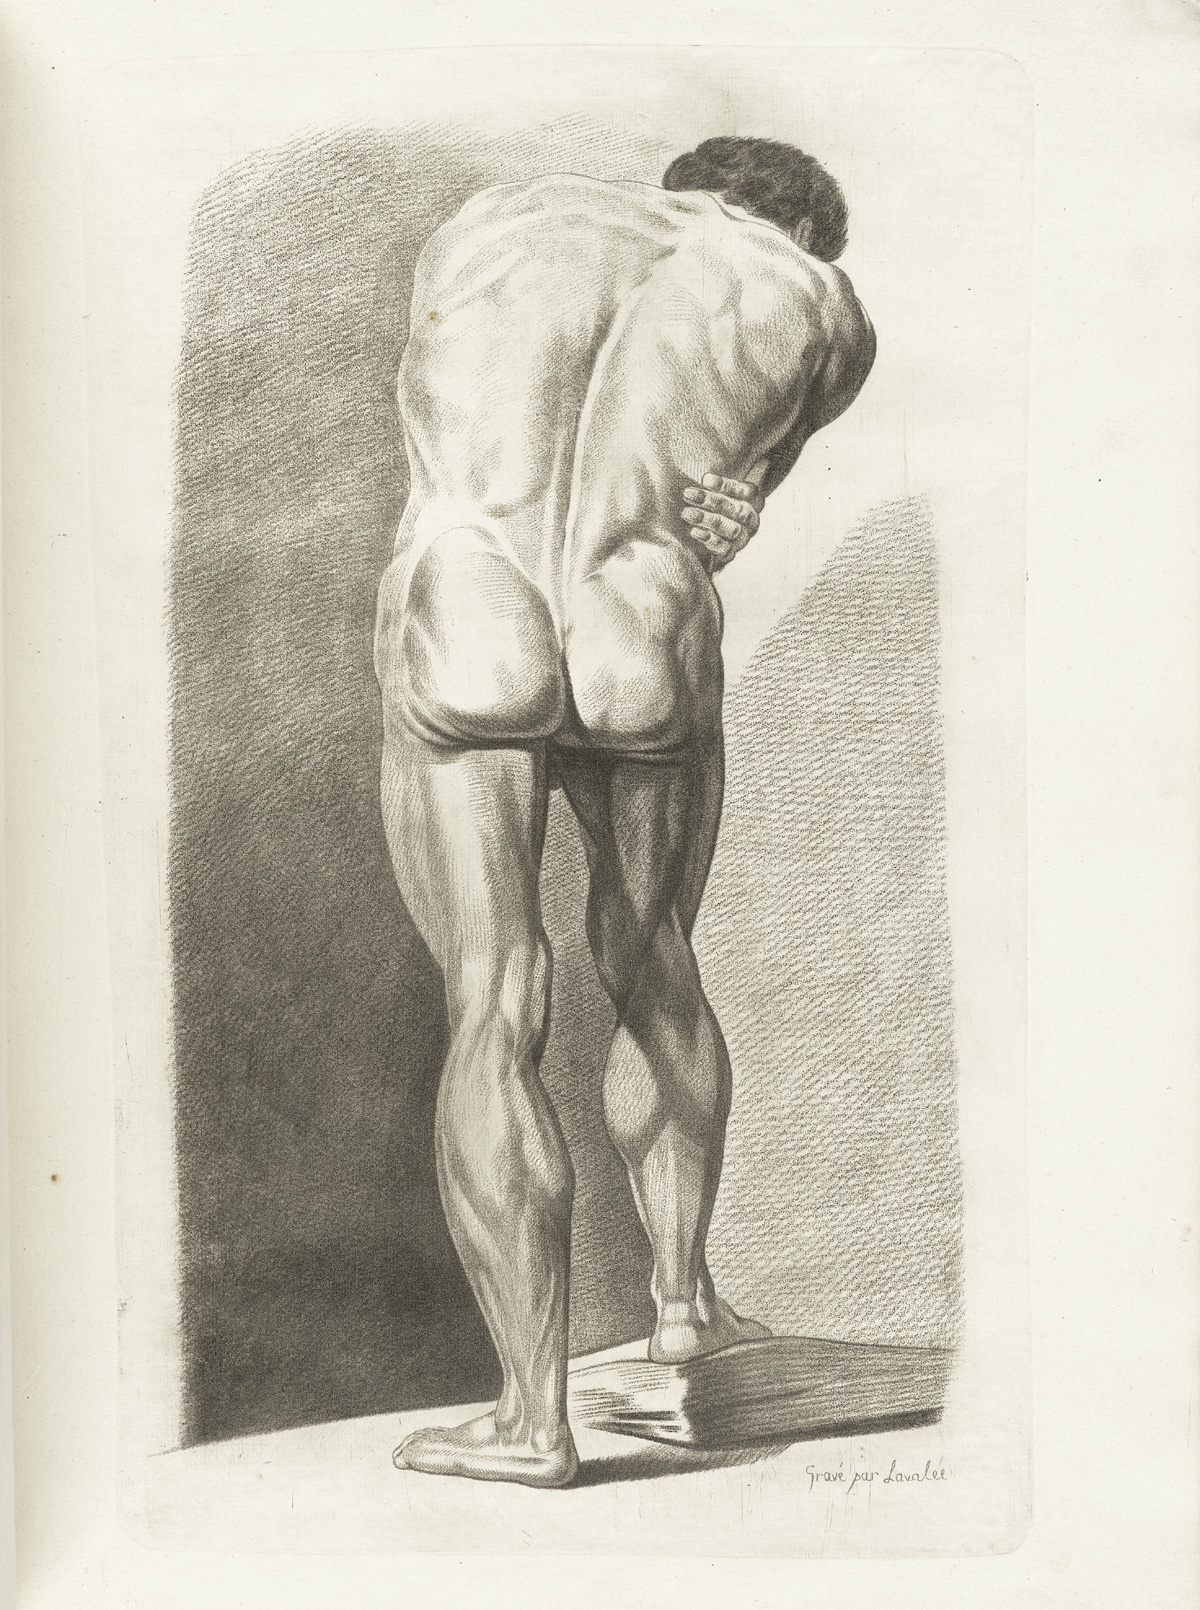 Engraving of a standing nude male figure with his back to the viewer, with detail of the musculature of the back, buttocks and legs; from Jacques Gamelin’s Nouveau recueil d’osteologie et de myologie, NLM Call no.: WZ 260 G178m 1779.